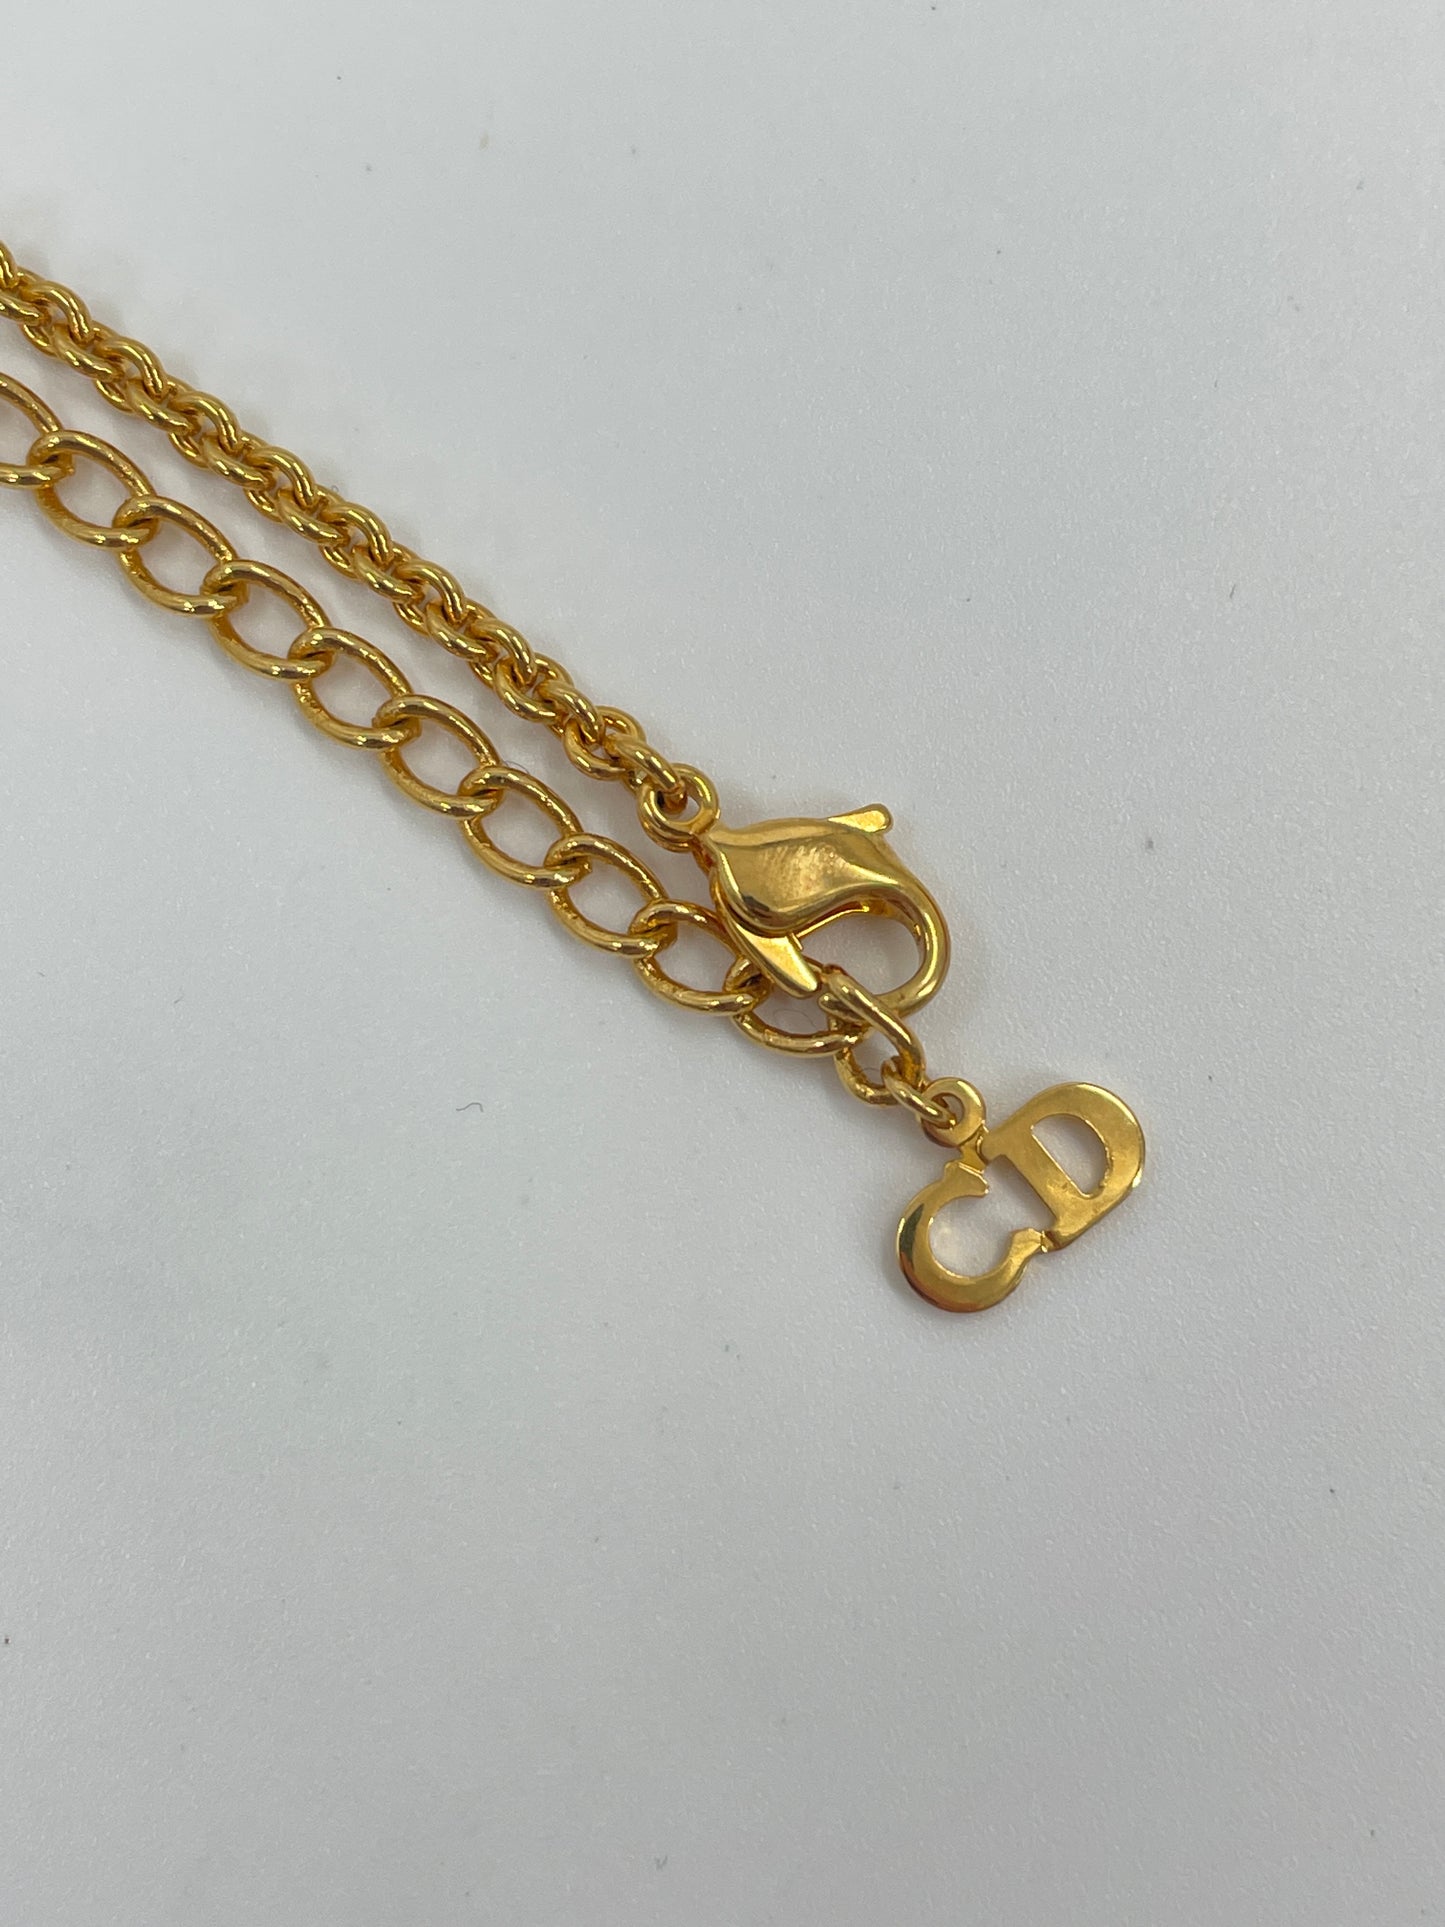 CHRISTIAN DIOR Gold Chain Necklace